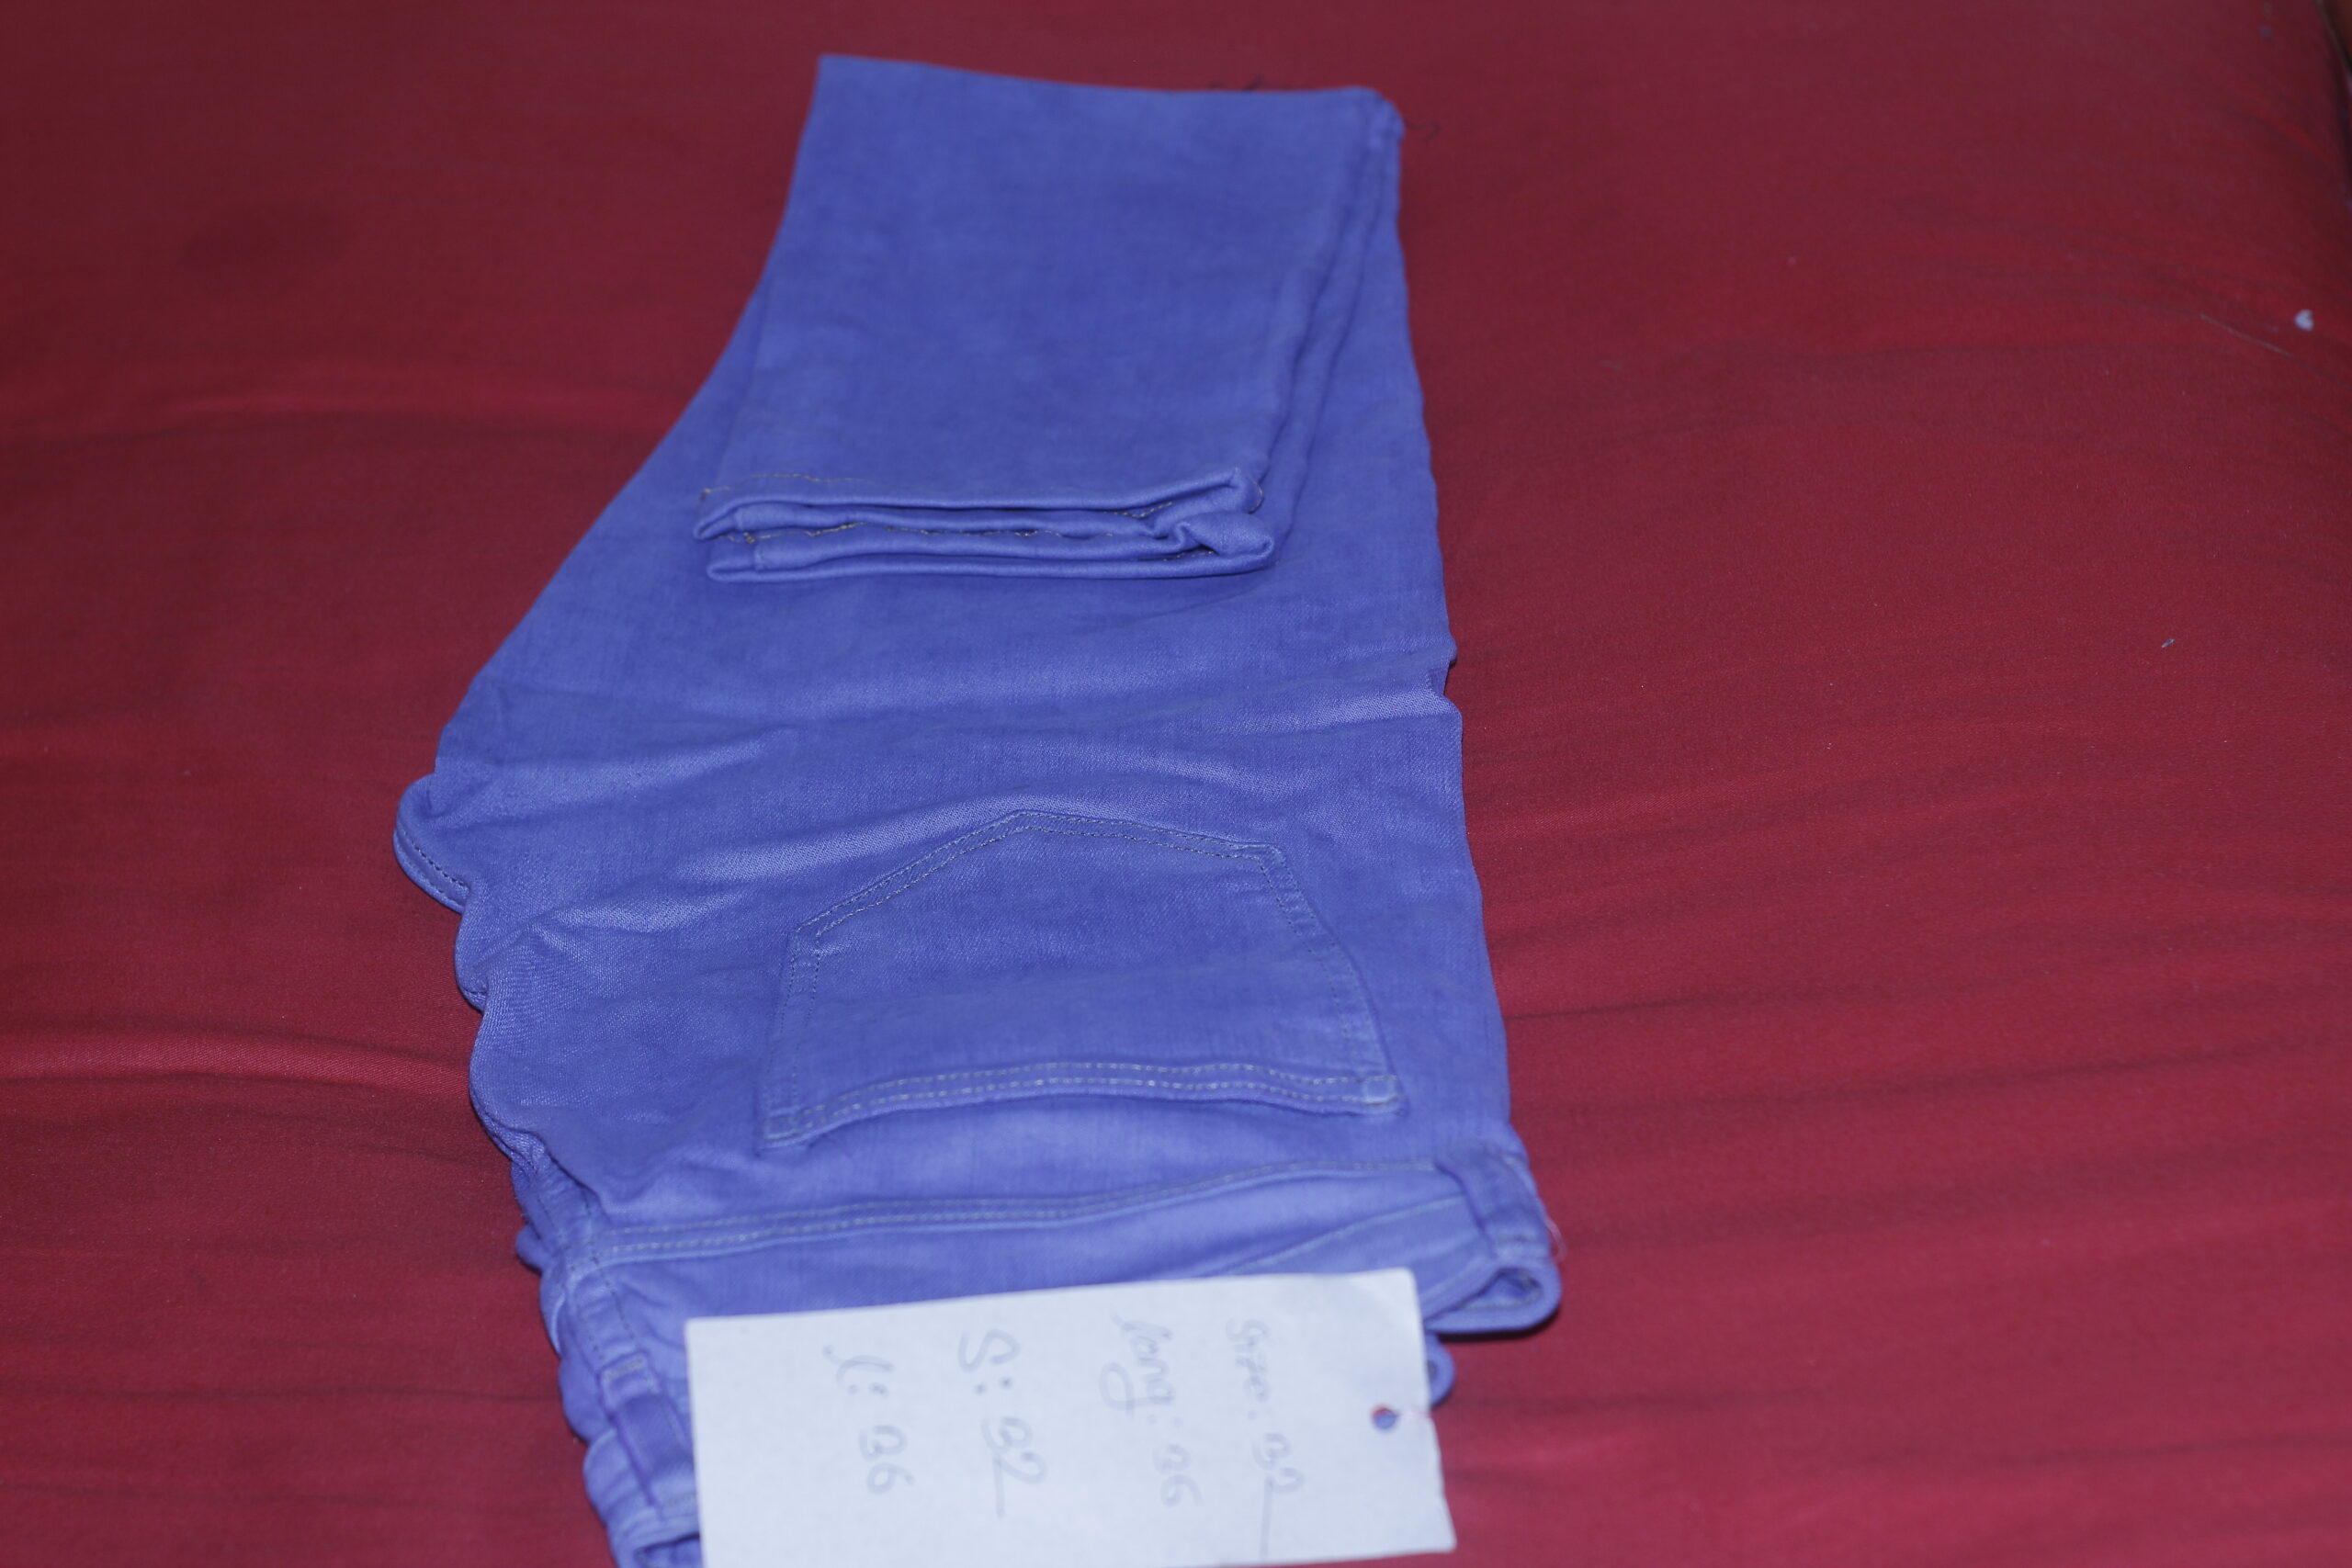 Jeans Pant For Man Size: 32